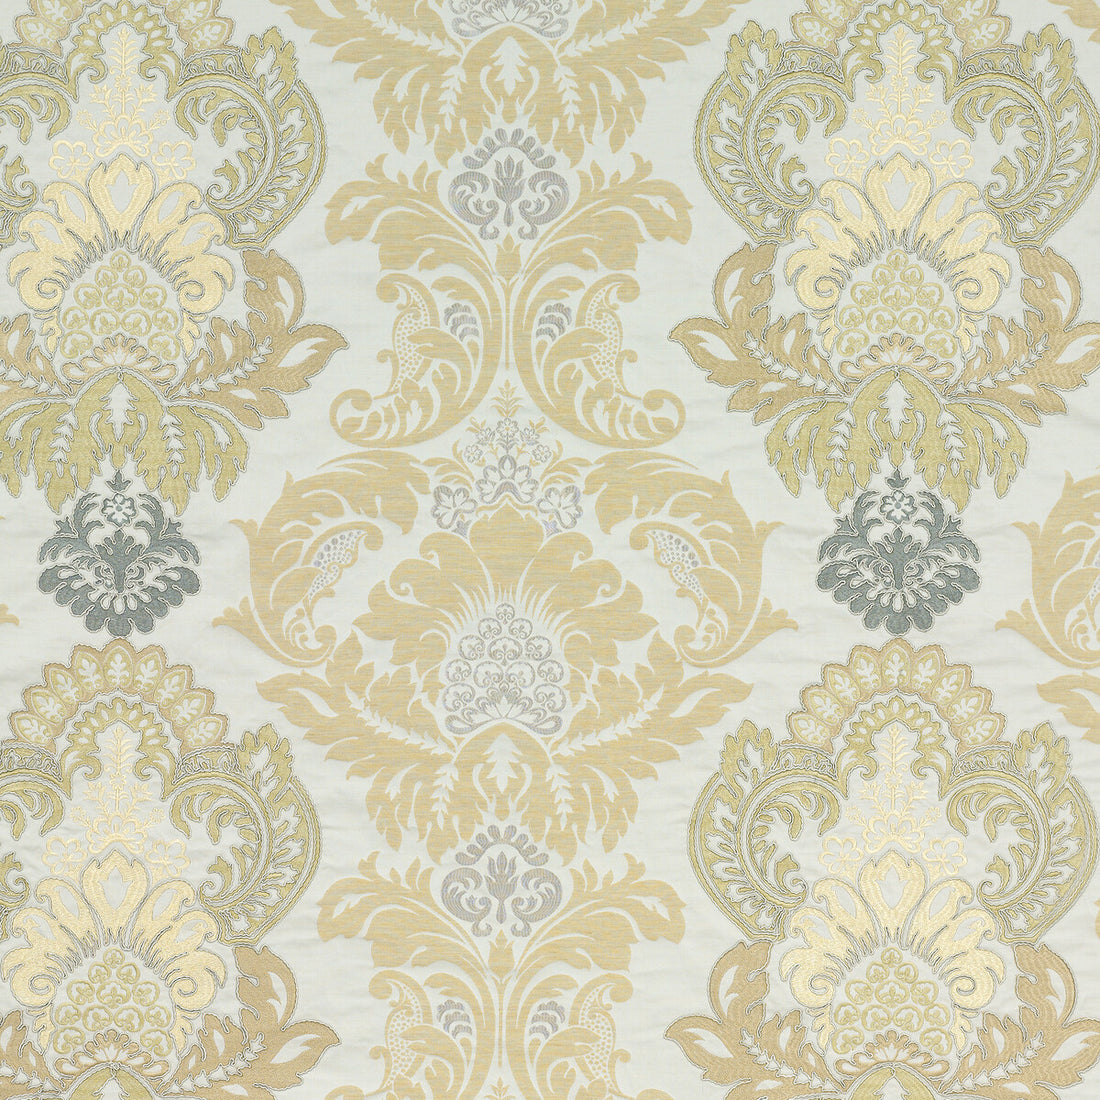 Waterford Damask fabric in bronze/natural color - pattern BF10509.3.0 - by G P &amp; J Baker in the Simply Damask collection